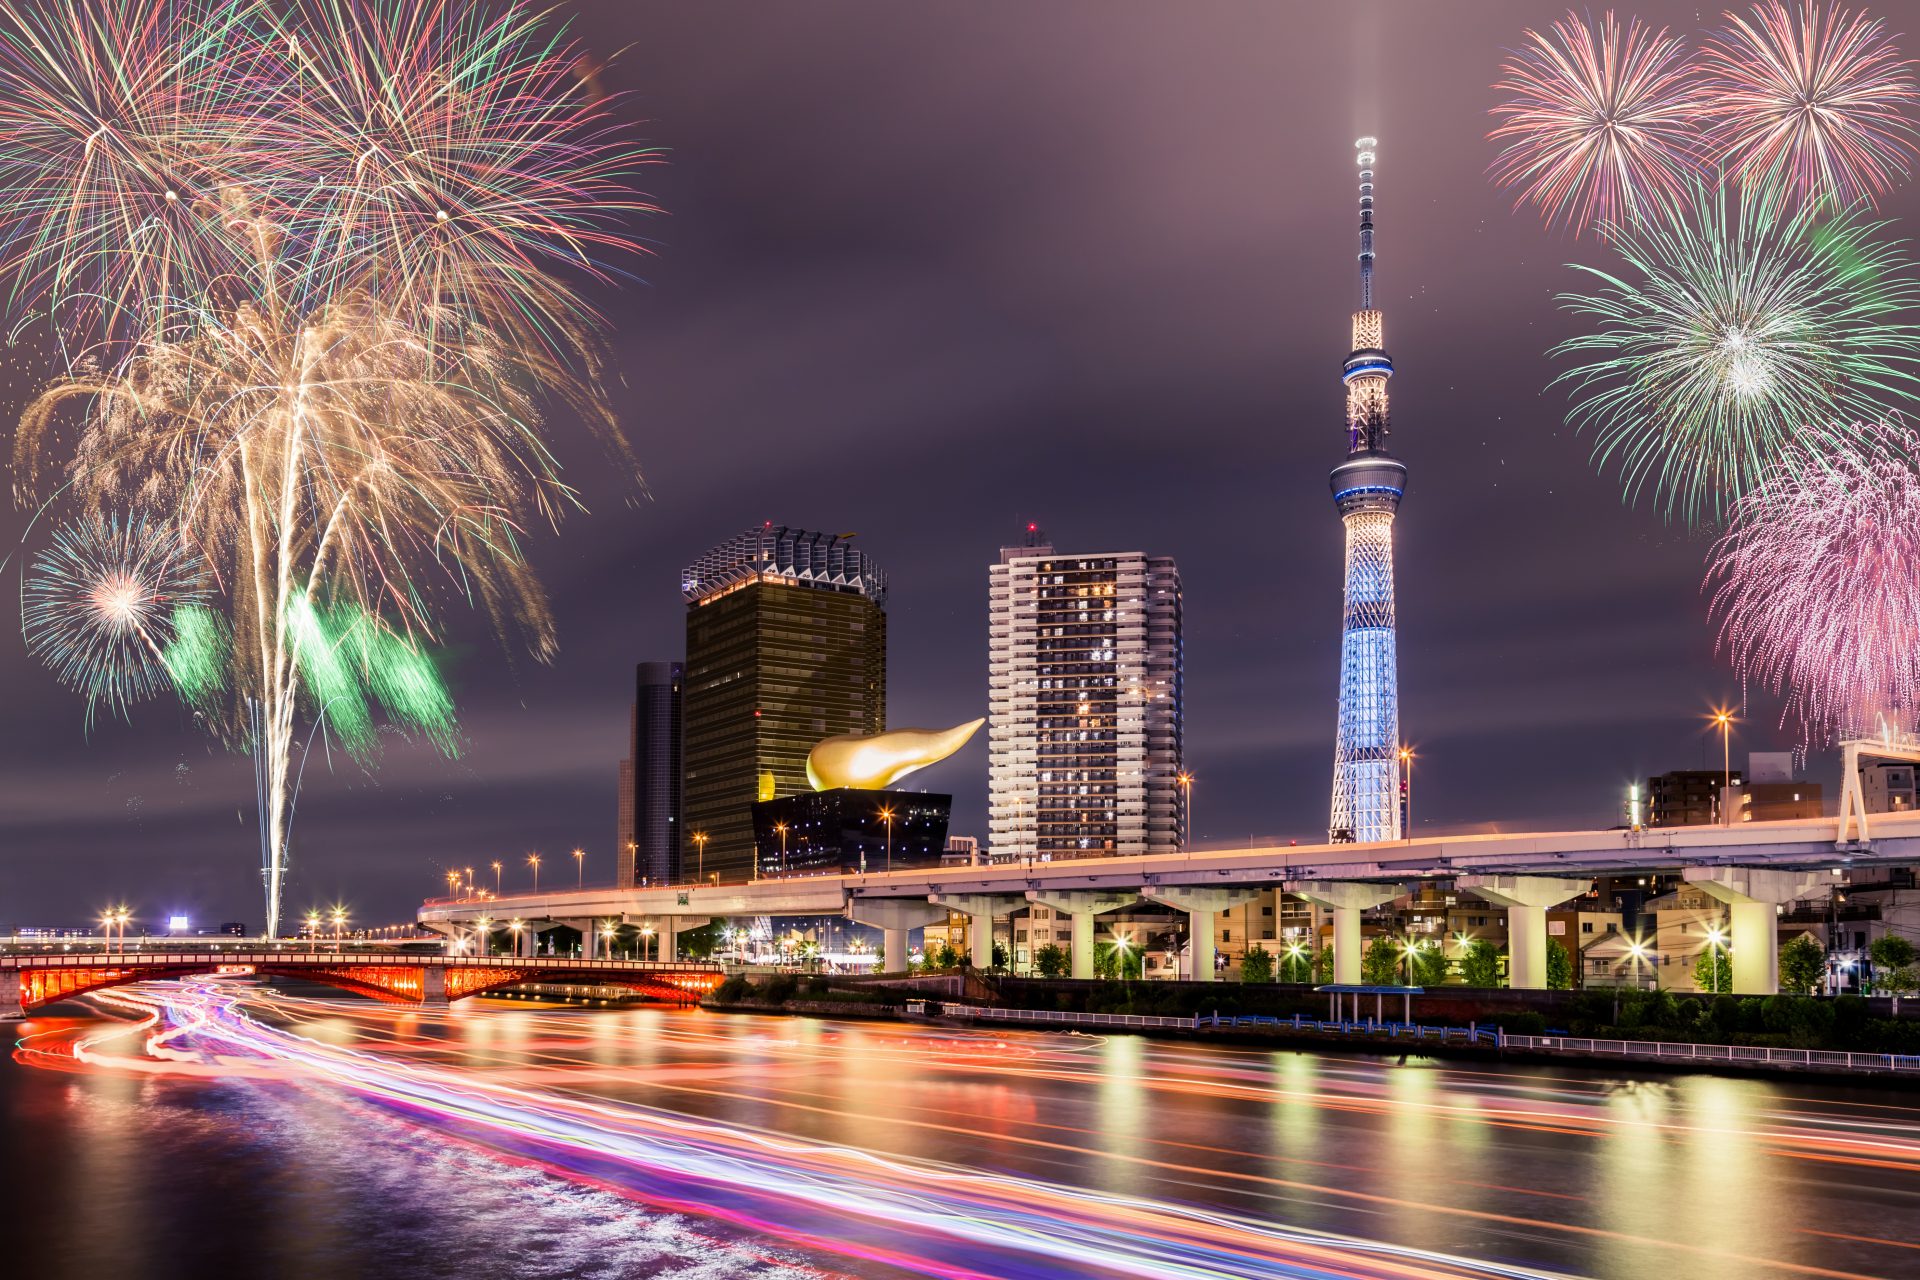 New Year's Eve in Asian countries